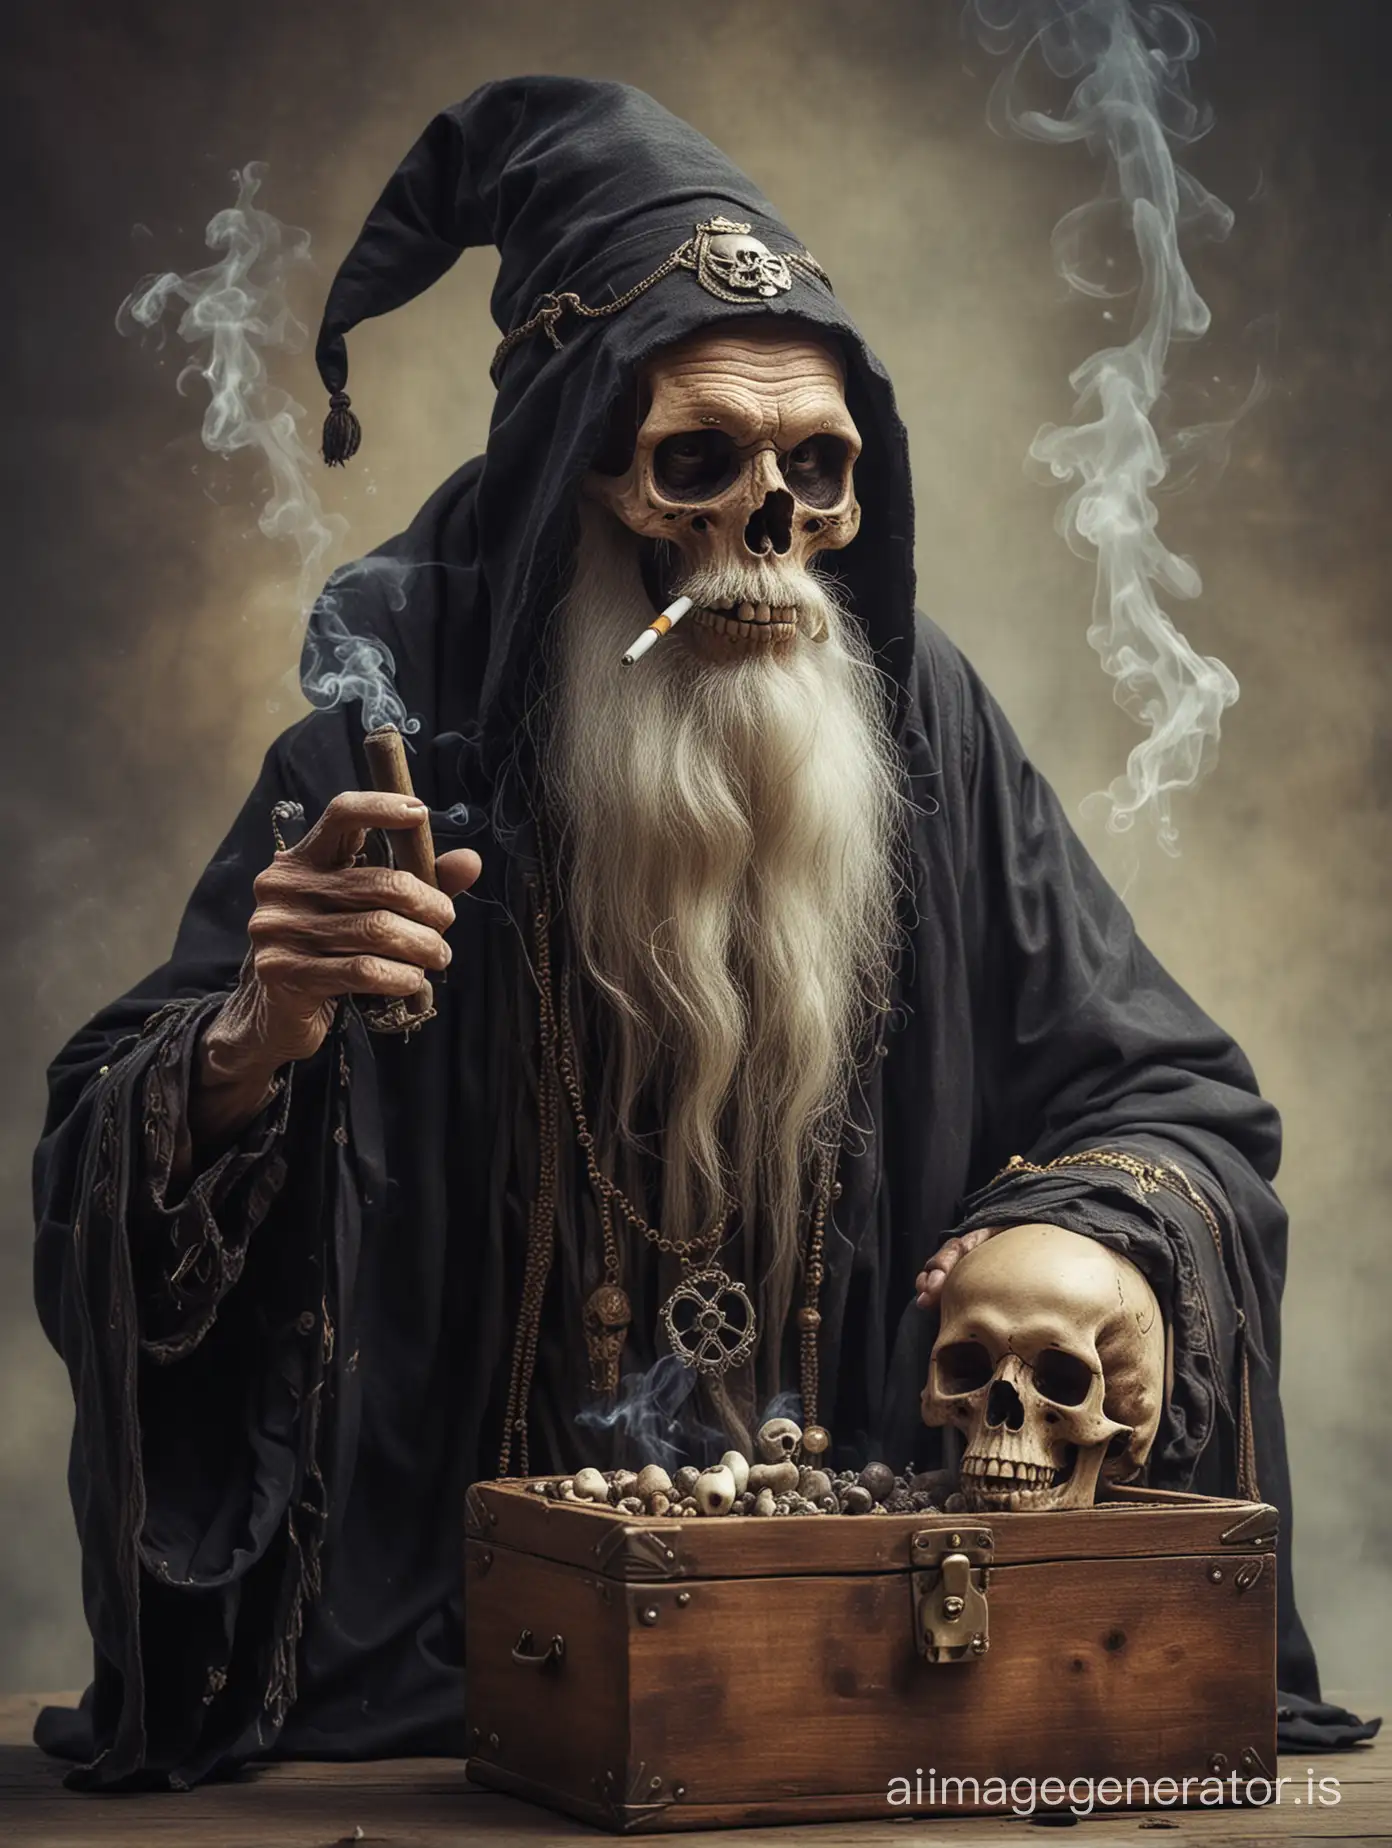 old wizard smoking drugs. Has a skull in one hand and small wooden case in the other hand